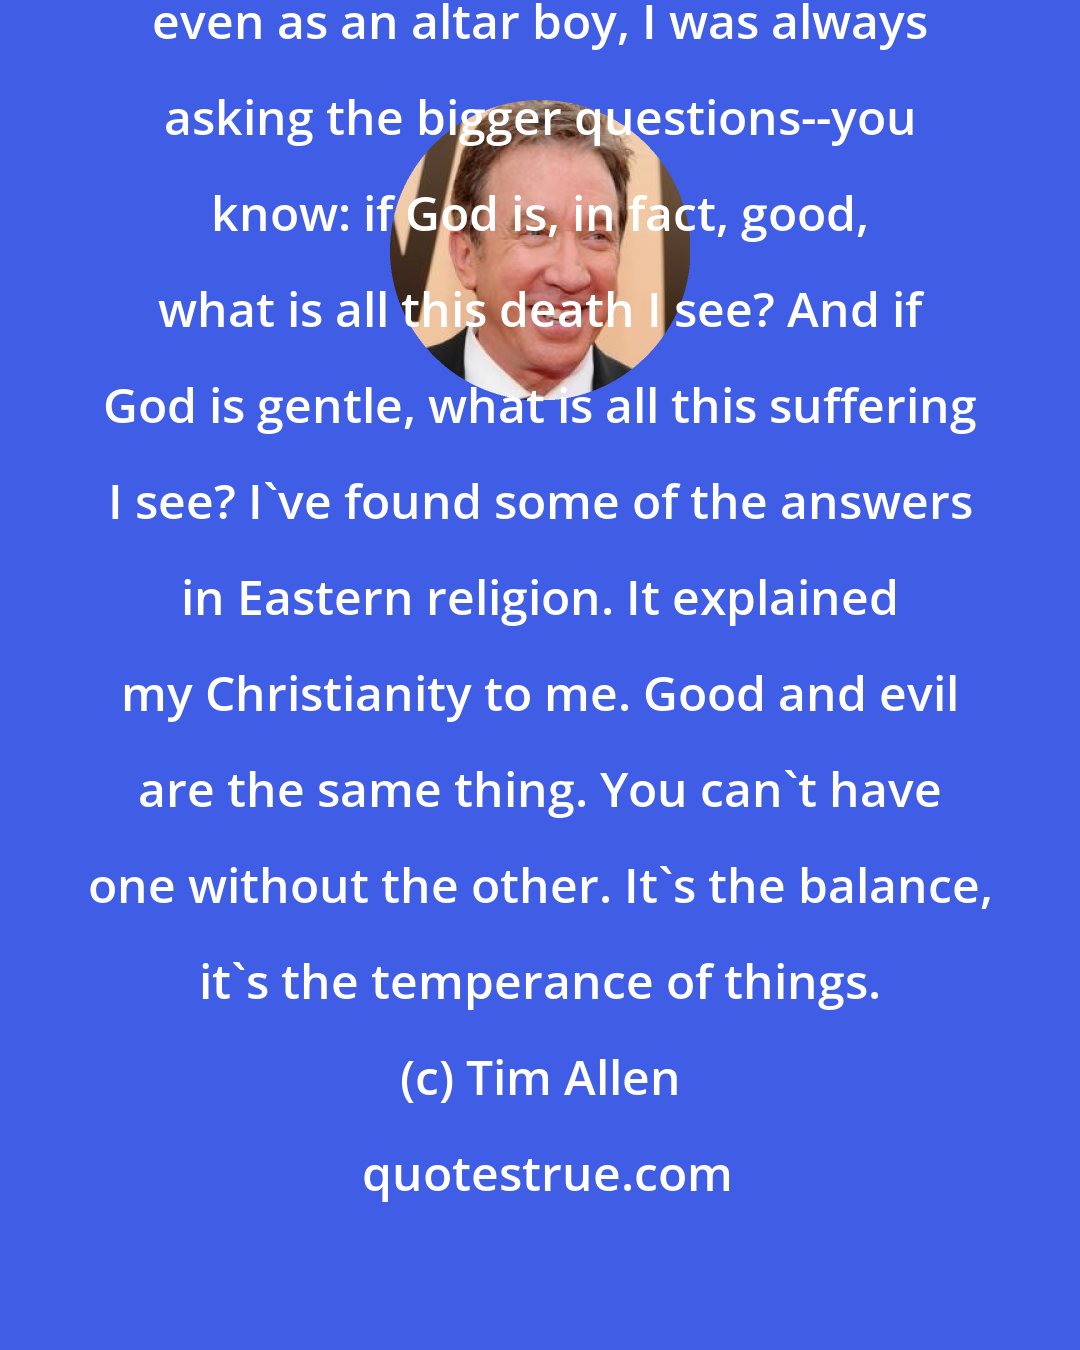 Tim Allen: I'm a pretty solid Christian. But even as an altar boy, I was always asking the bigger questions--you know: if God is, in fact, good, what is all this death I see? And if God is gentle, what is all this suffering I see? I've found some of the answers in Eastern religion. It explained my Christianity to me. Good and evil are the same thing. You can't have one without the other. It's the balance, it's the temperance of things.